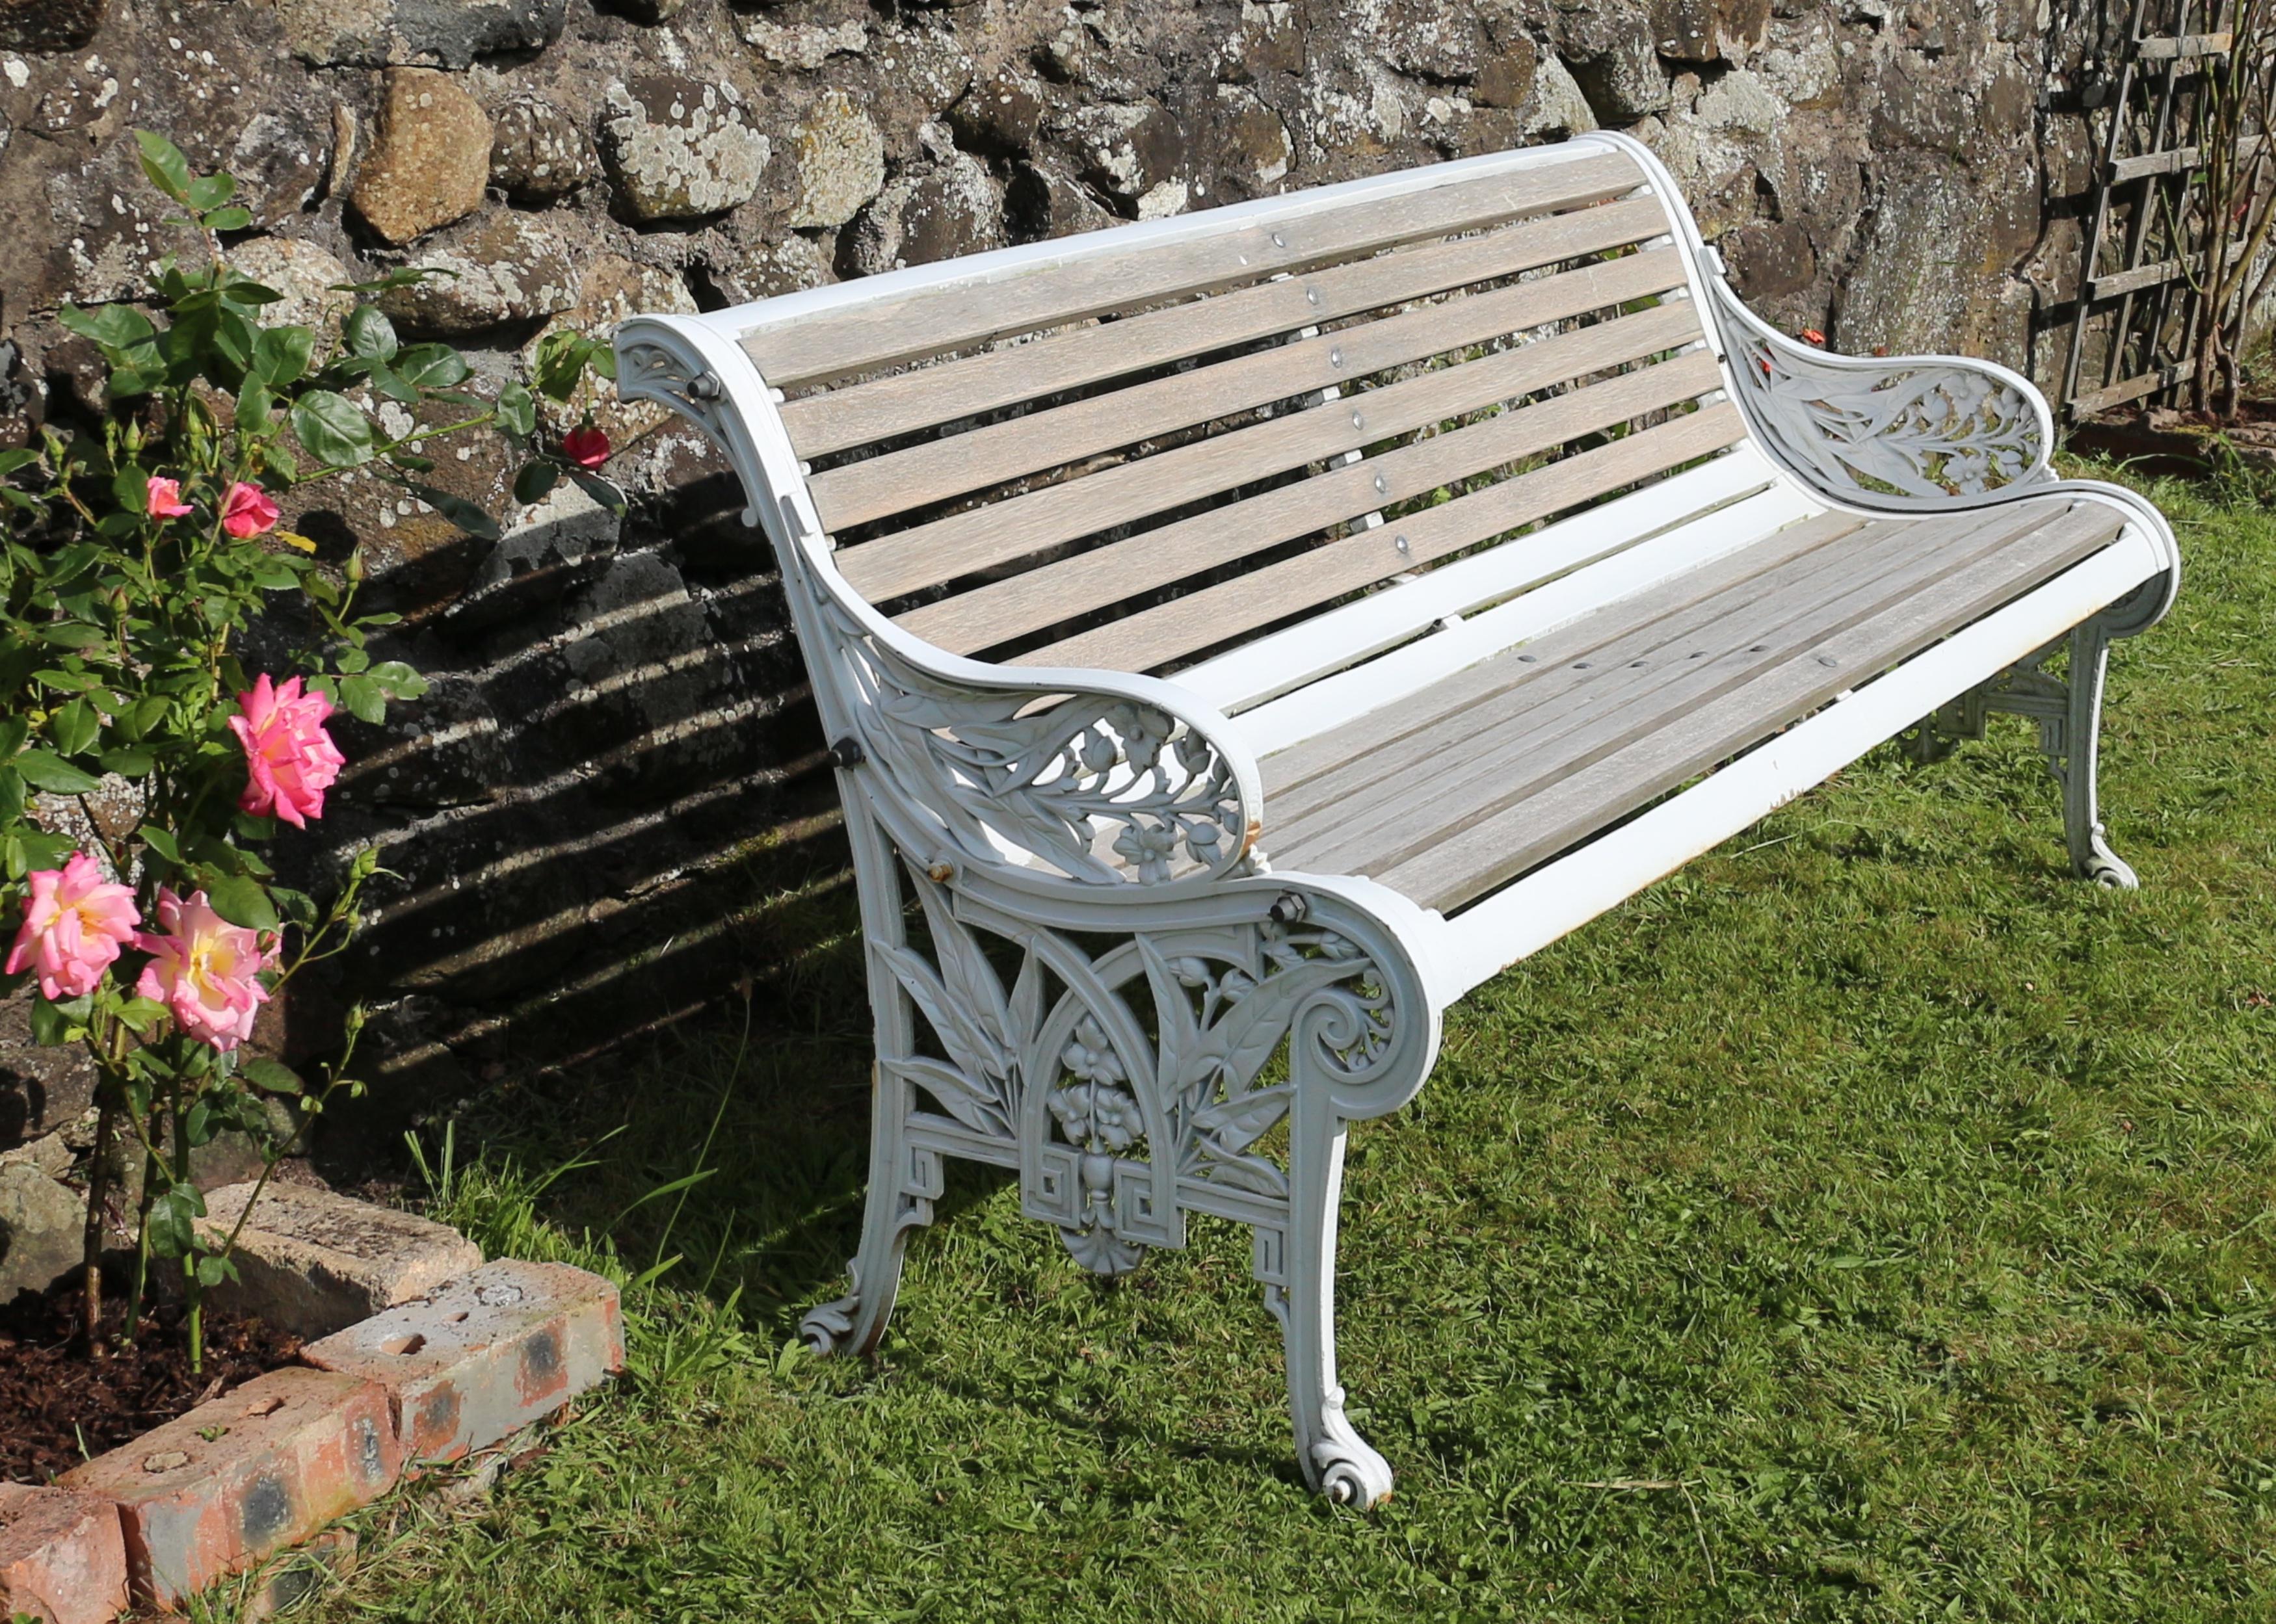 A stylish Victorian Aesthetic cast iron garden seat or bench by the John Finch Foundry and dating to circa 1870. This Arts & Crafts period seat has pierced sides combining formal geometric Greek key decoration with the naturalistic shapes of the